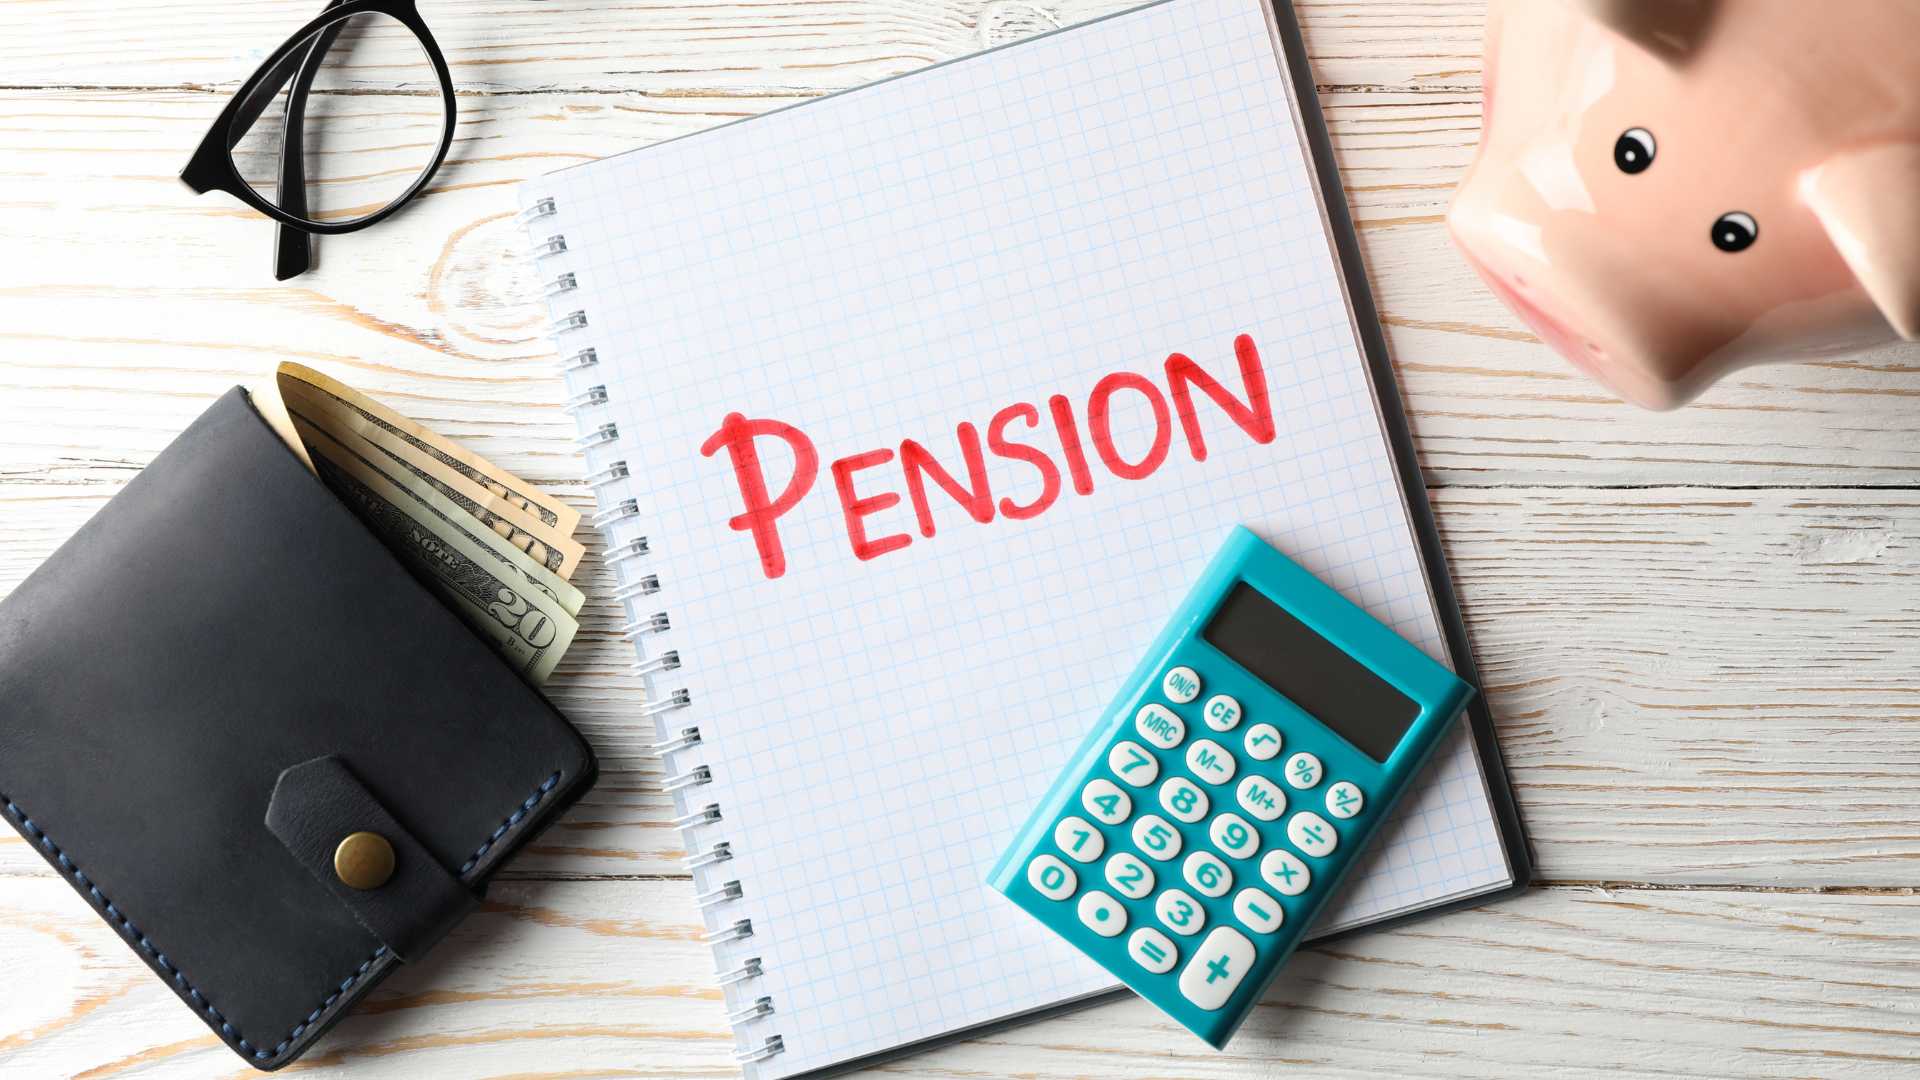 You are currently viewing National Pension Scheme (NPS): Benefits, Returns and Eligibility